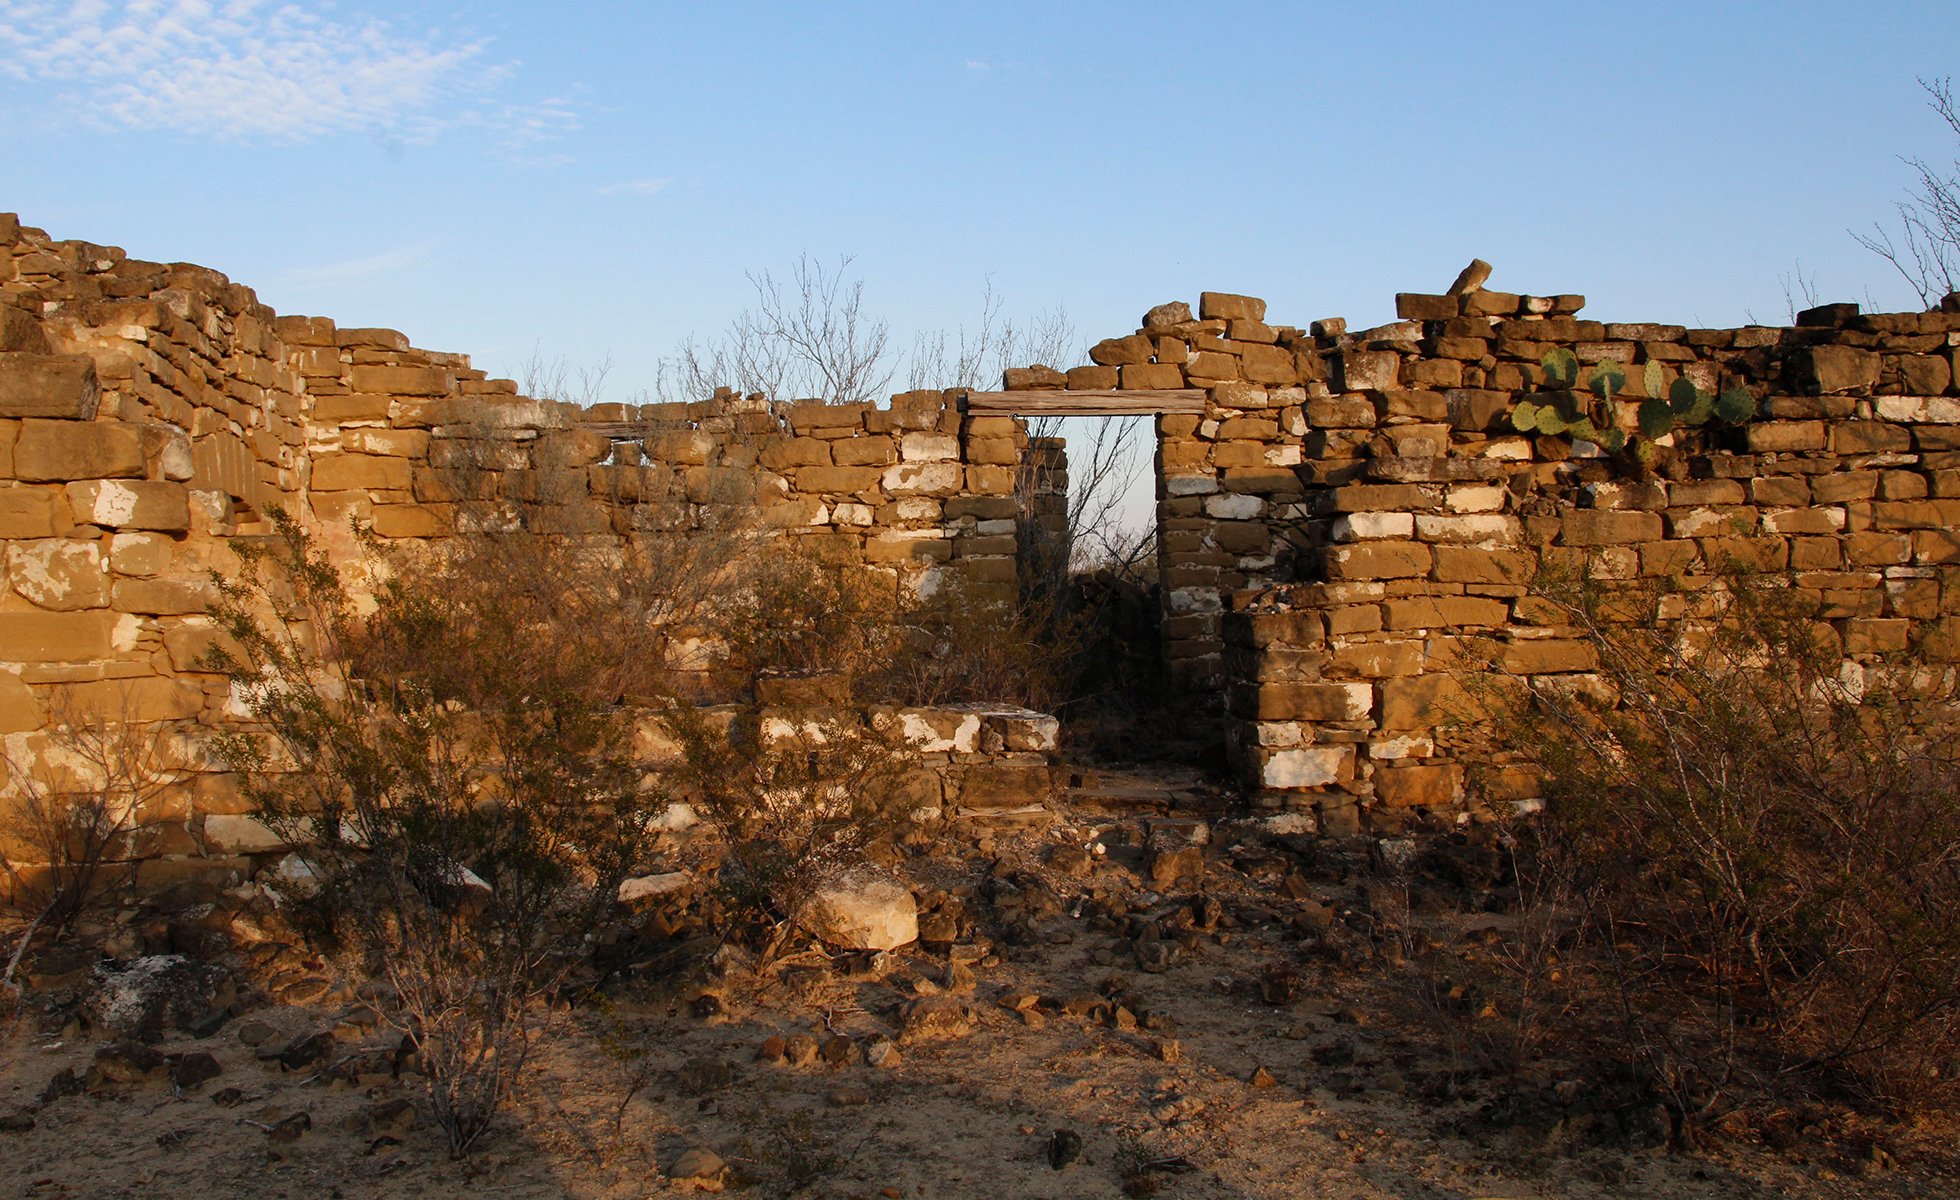 Mid-19th-century ruins found on Vargas’ land in Zapata County.